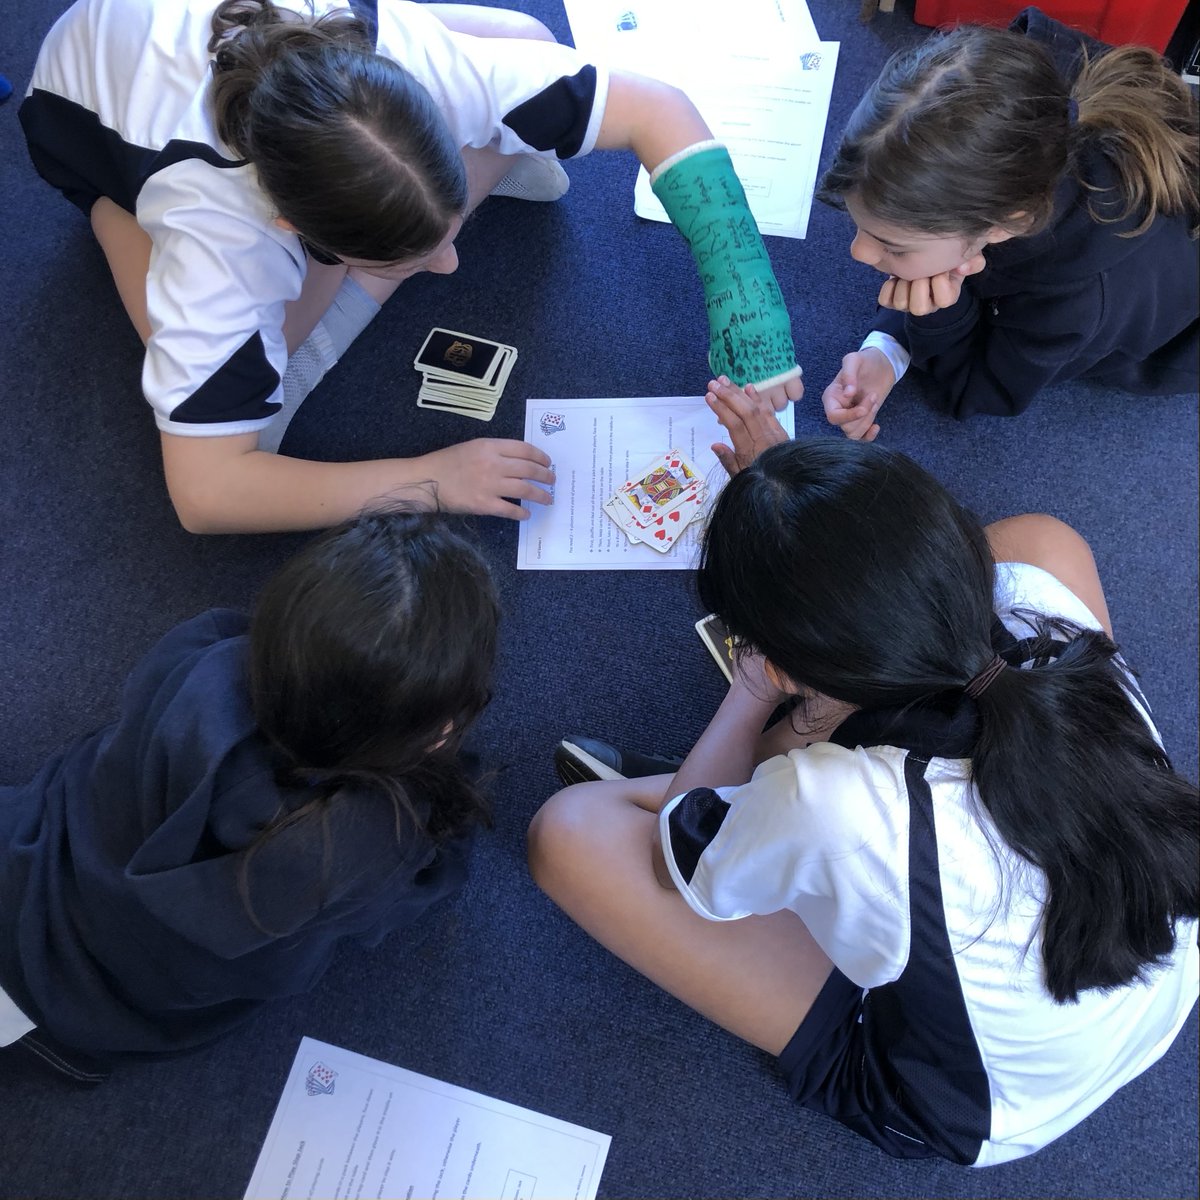 ♣️♥️♠️♦️Year 5 are loving the start of their Instructions and Explanation unit of work in English. ♣️♥️♠️♦️ Noting features of instructions, evaluating the effectiveness of instructions, and identifying how to improve instructions to successfully play card games. @HamiltonTrust